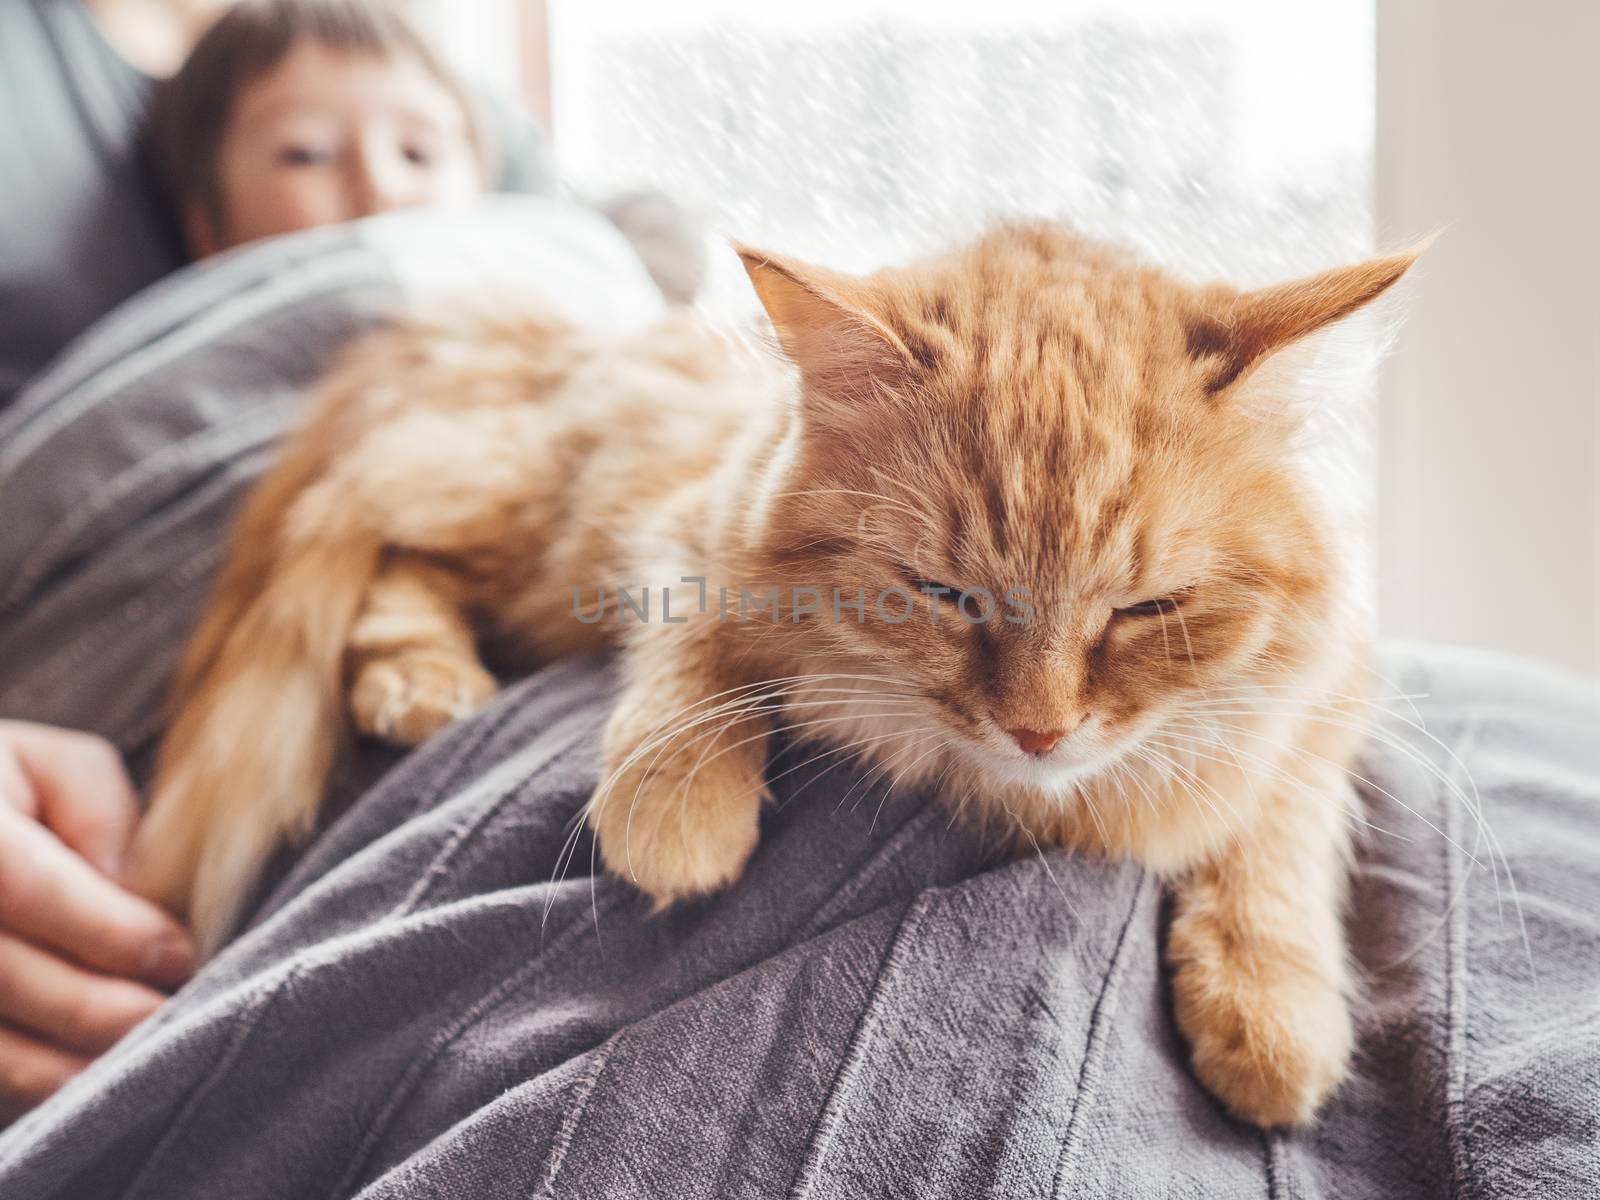 Father, son and they's cute ginger cat sit on window sill. Family relax under blanket. Man, toddler boy and fluffy pet at cozy home while snow is falling outside.